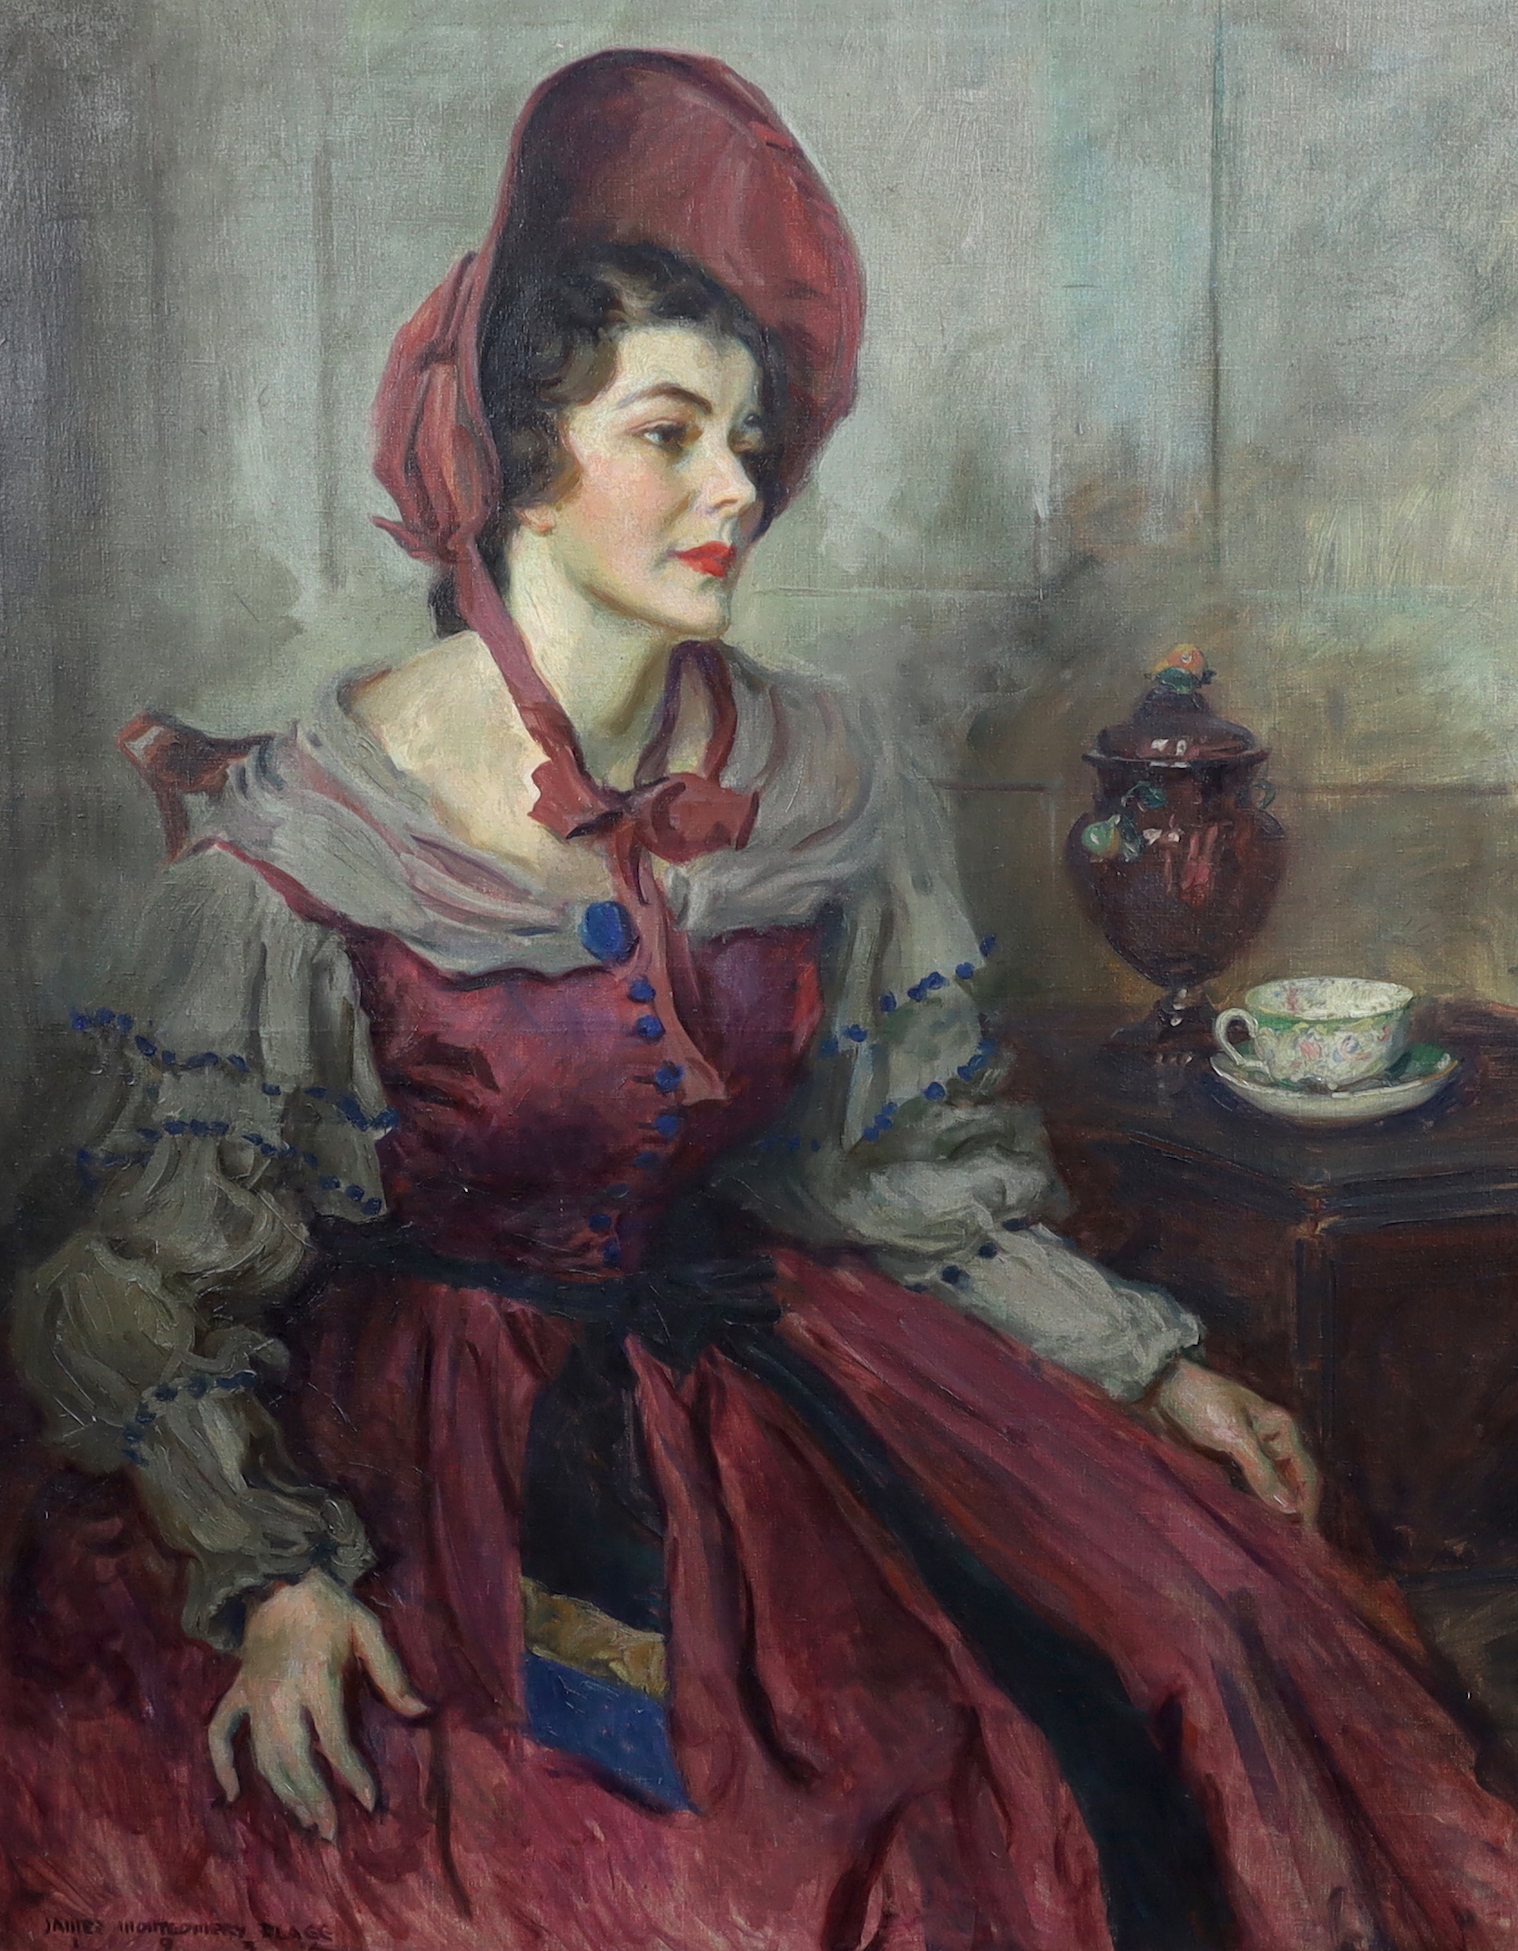 James Montgomery Flagg (American, 1877-1960), Portrait of Kathleen Parkhurst in The Pirates of Penzance, D'Oyly Carte Opera Company, oil on canvas, 126 x 100cm                                                             